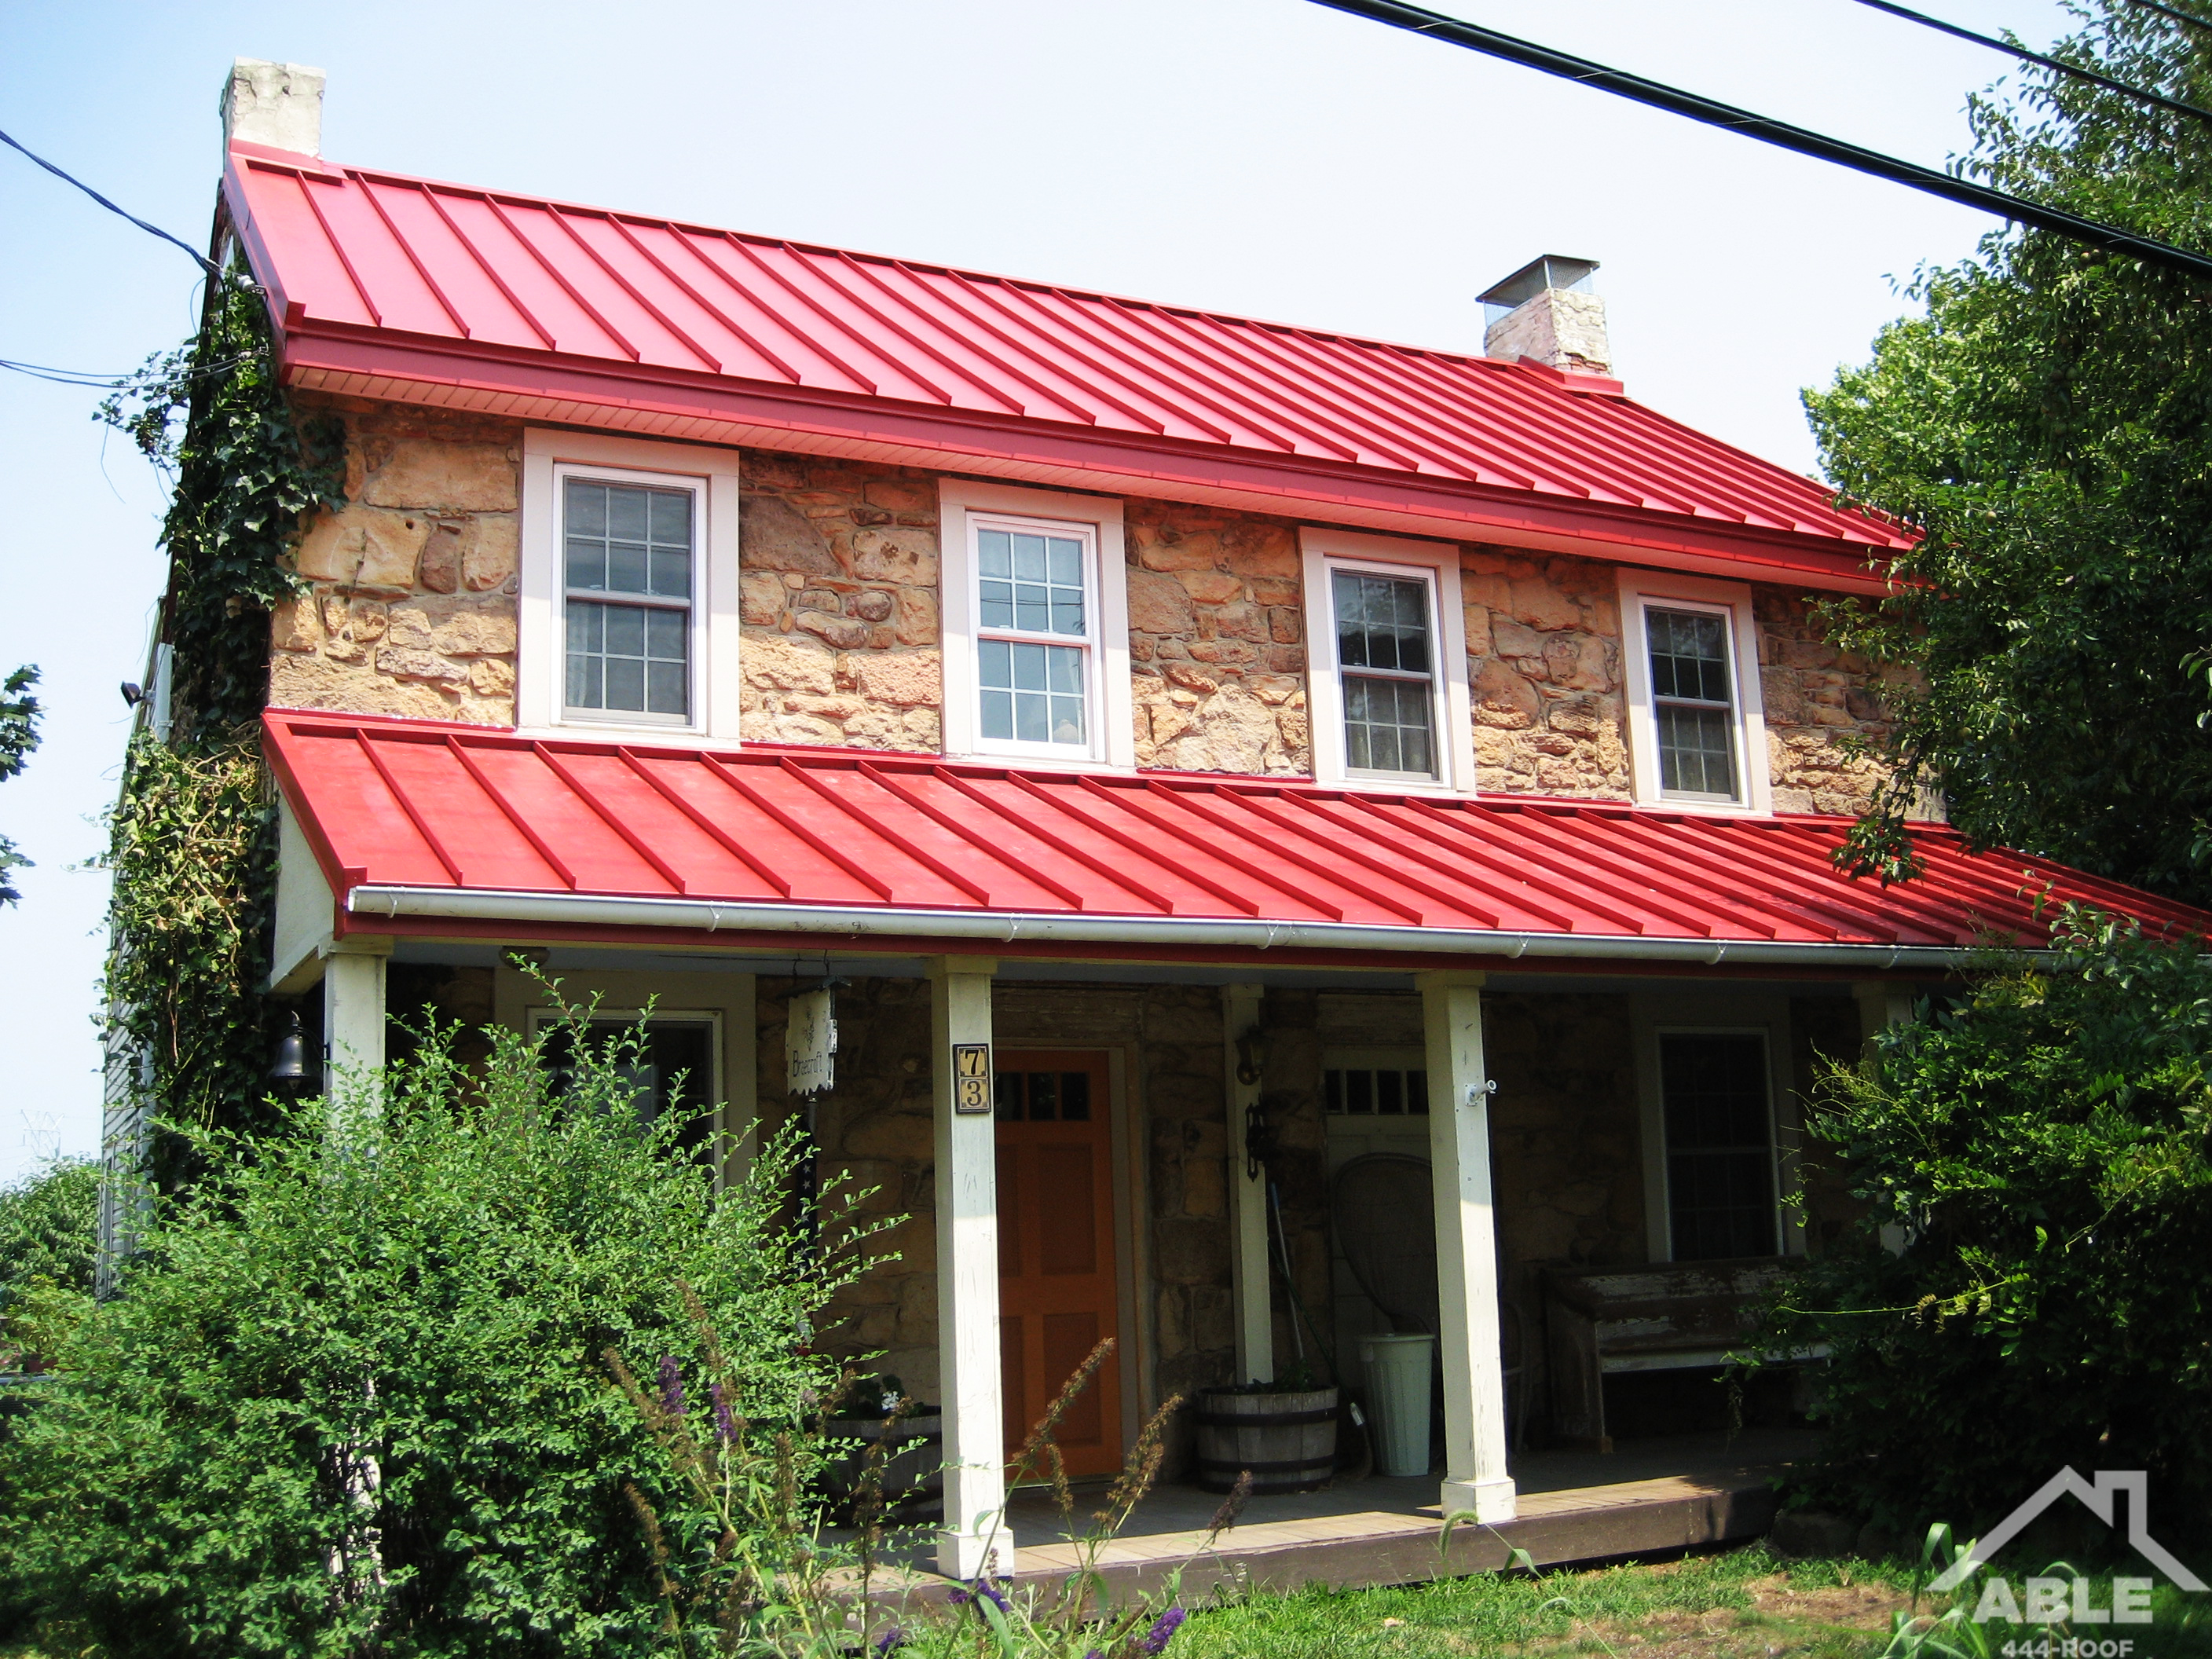 red roof